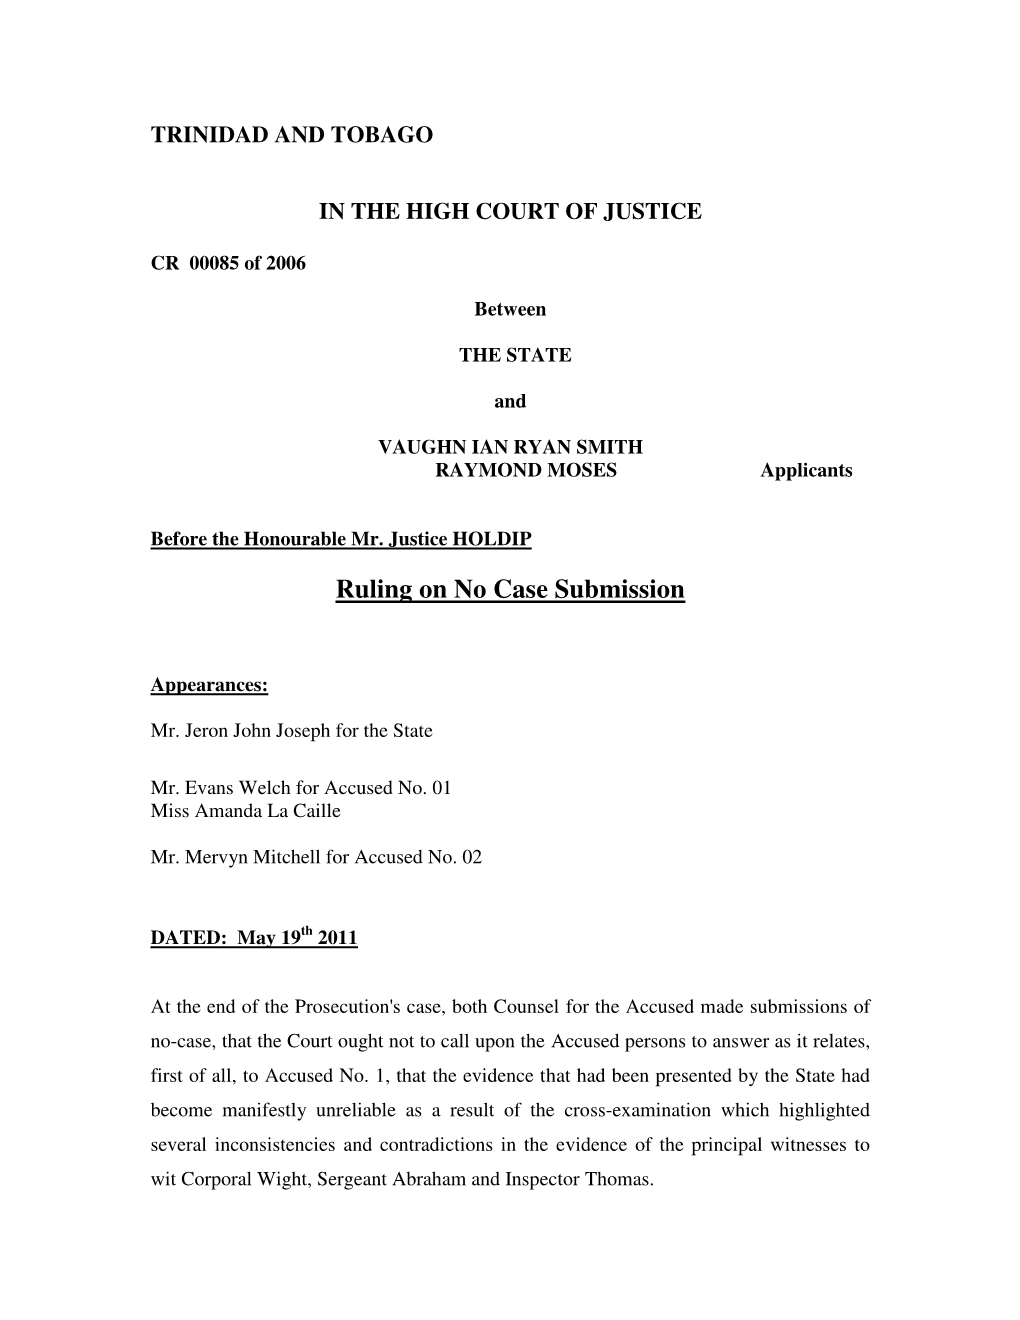 Ruling on No Case Submission